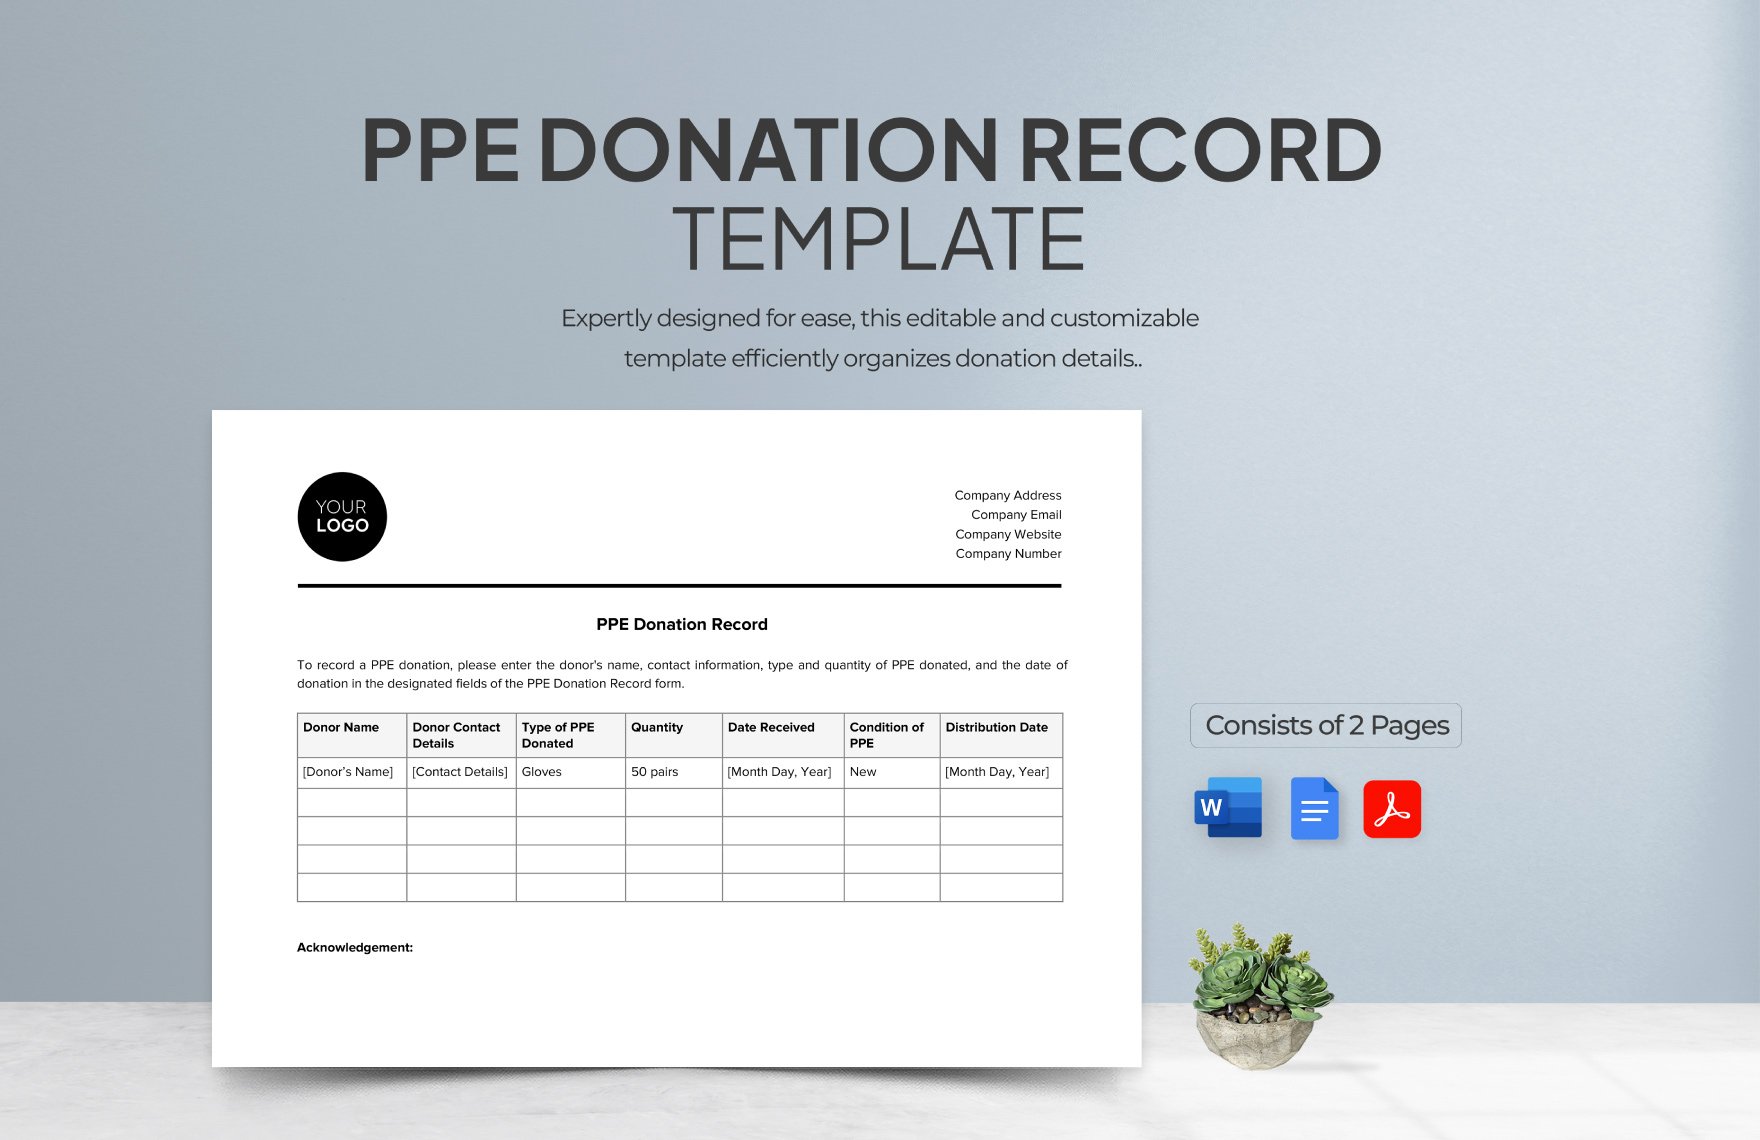 PPE Donation Record Template